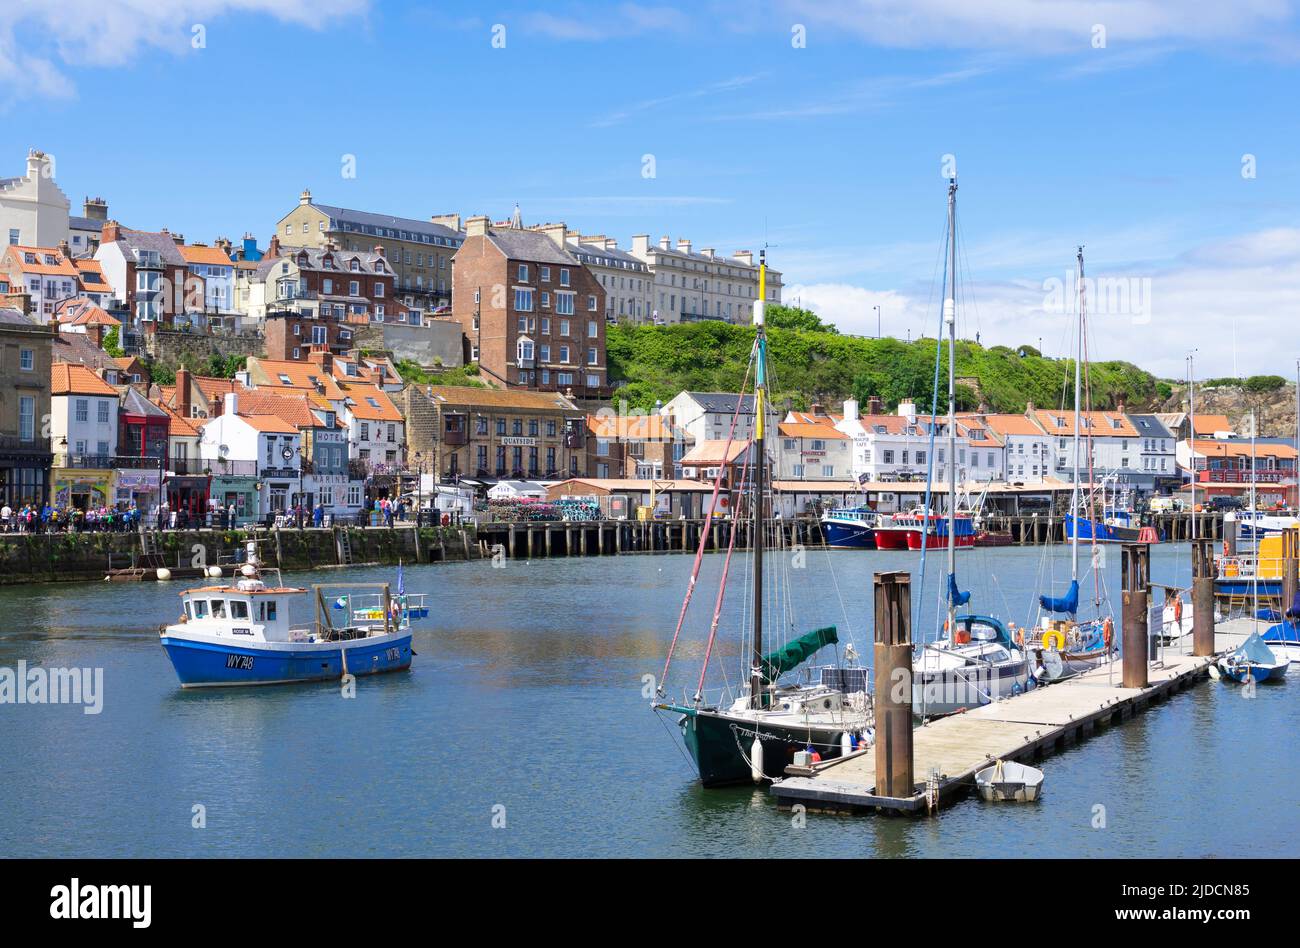 Whitby Yorkshire Whitby Harbour with small fishing boat coming into the harbour and the quayside Whitby North Yorkshire England UK GB Europe Stock Photo